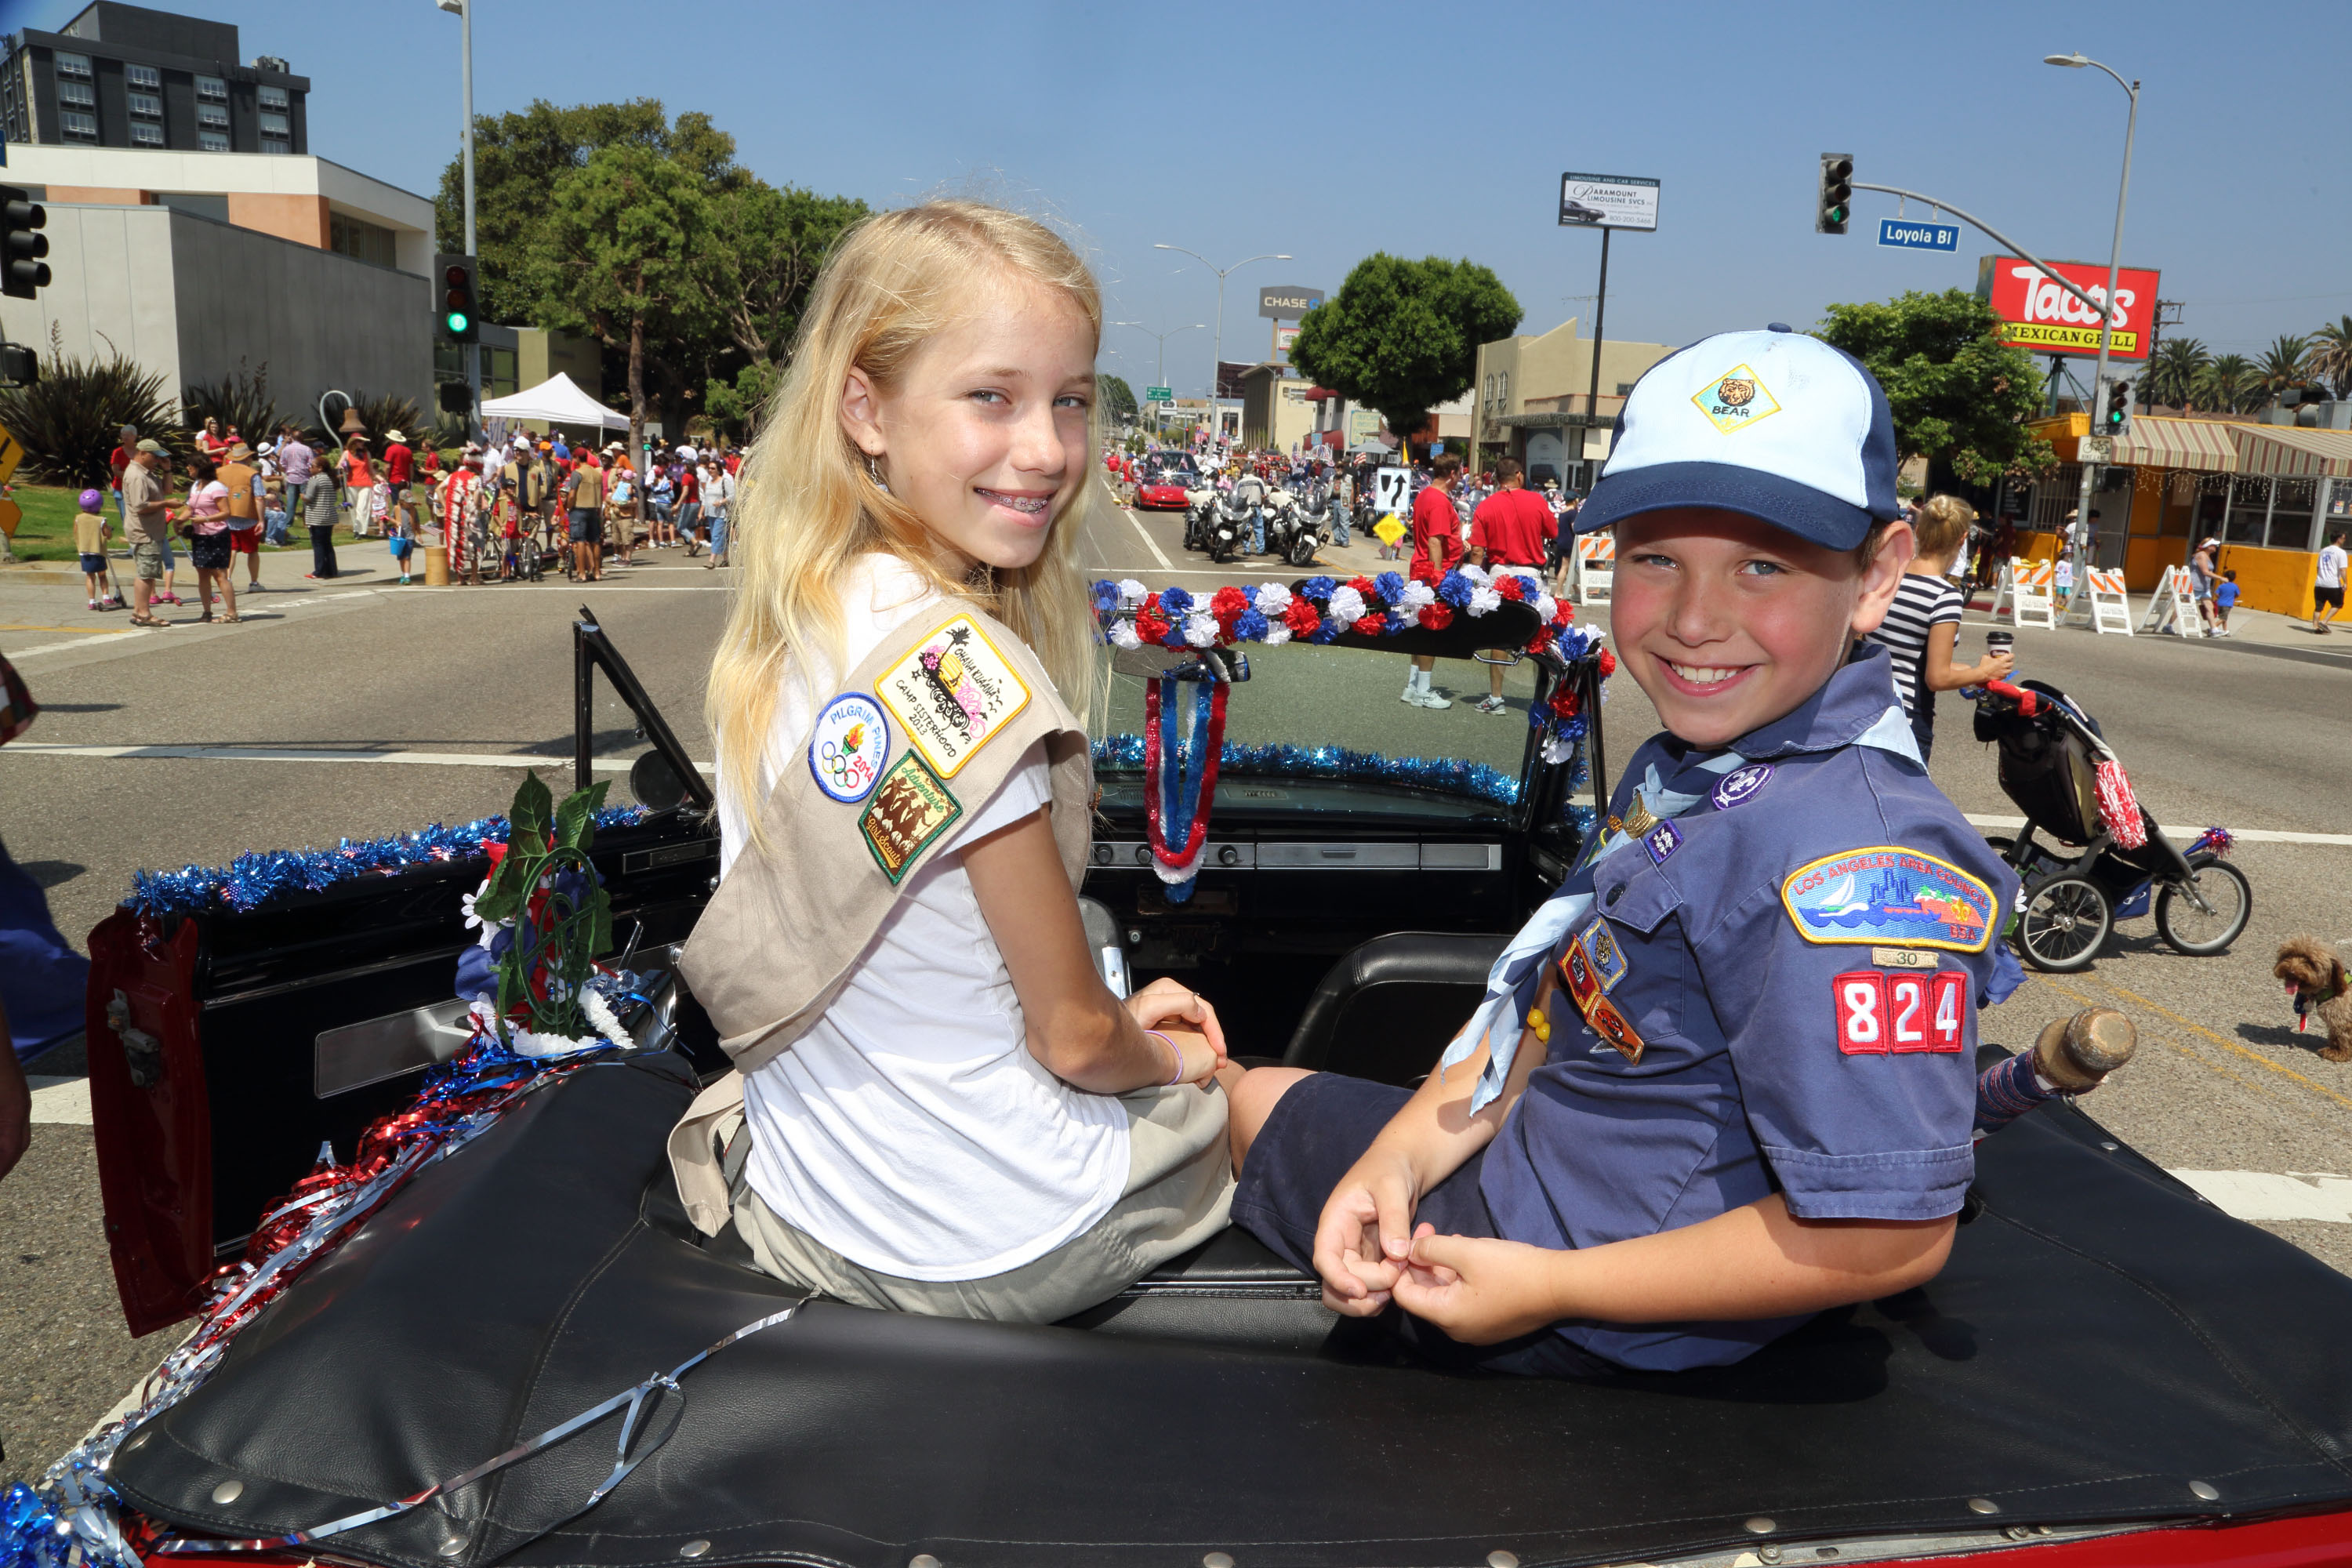 Congratulations to the floats that took home honors in the 2014 Fourth of July Parade